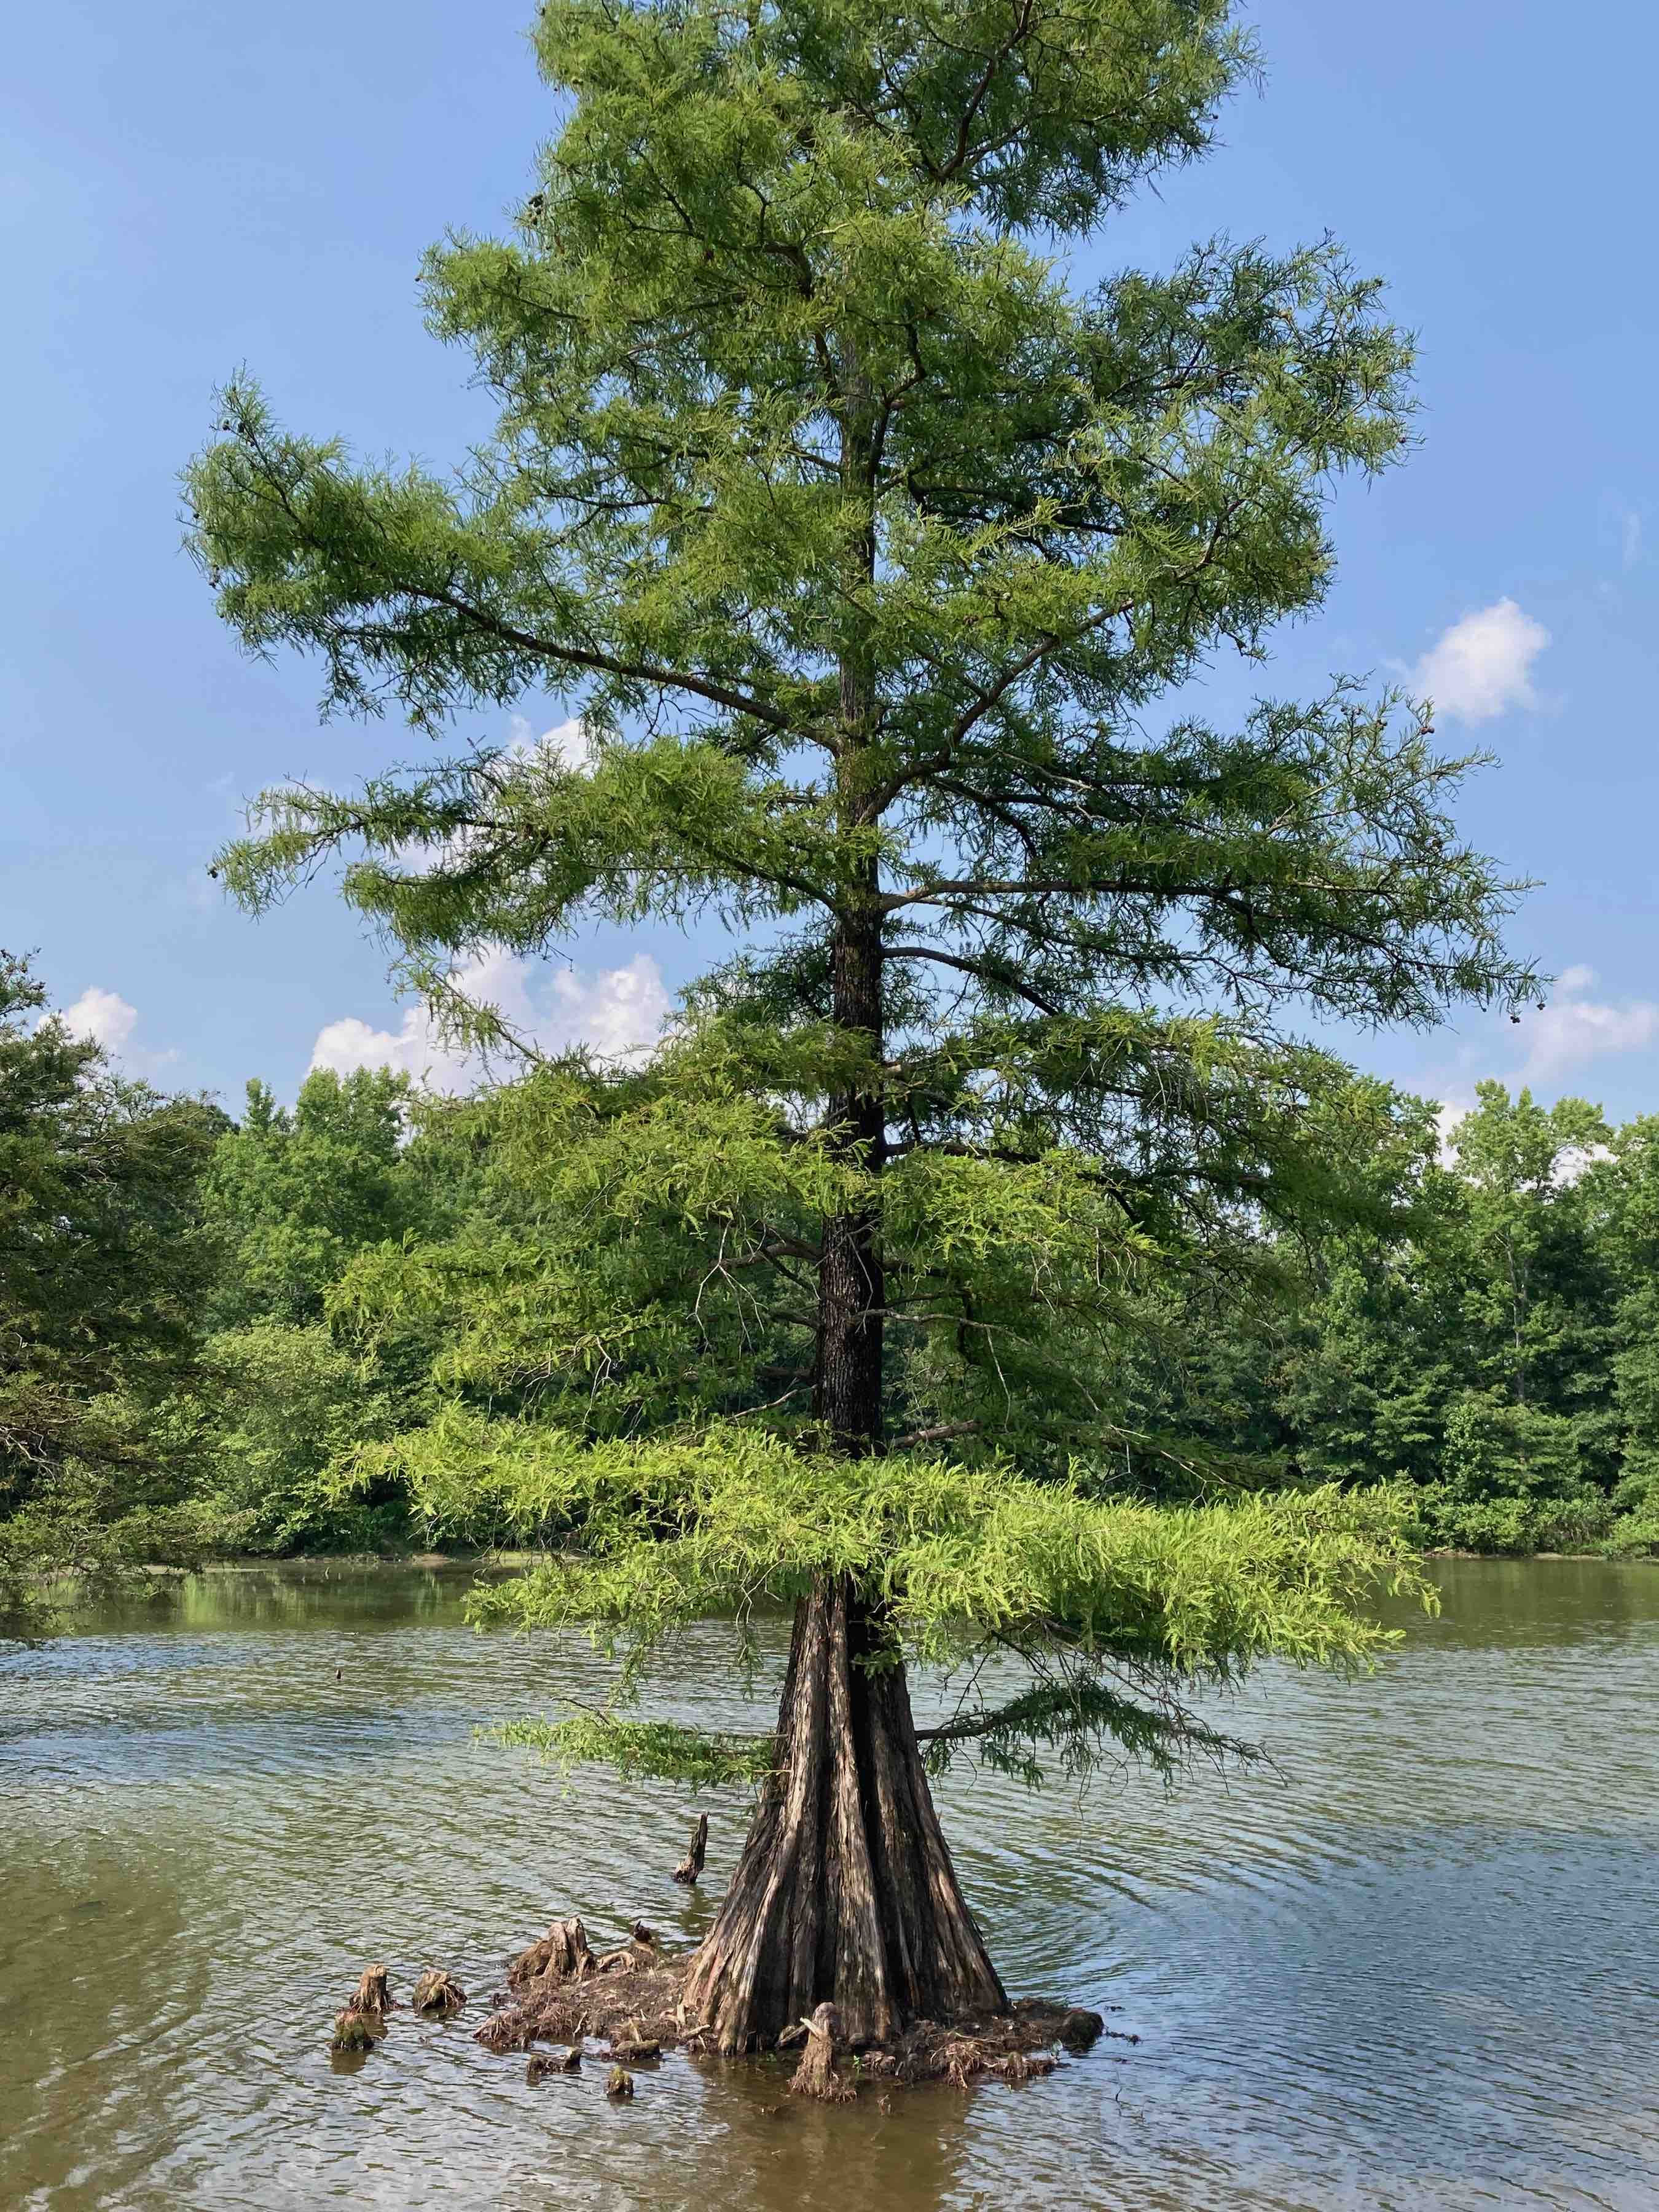 The Scientific Name is Taxodium distichum. You will likely hear them called Bald Cypress, Baldcypress, Swamp Cypress. This picture shows the Beautiful tree! of Taxodium distichum